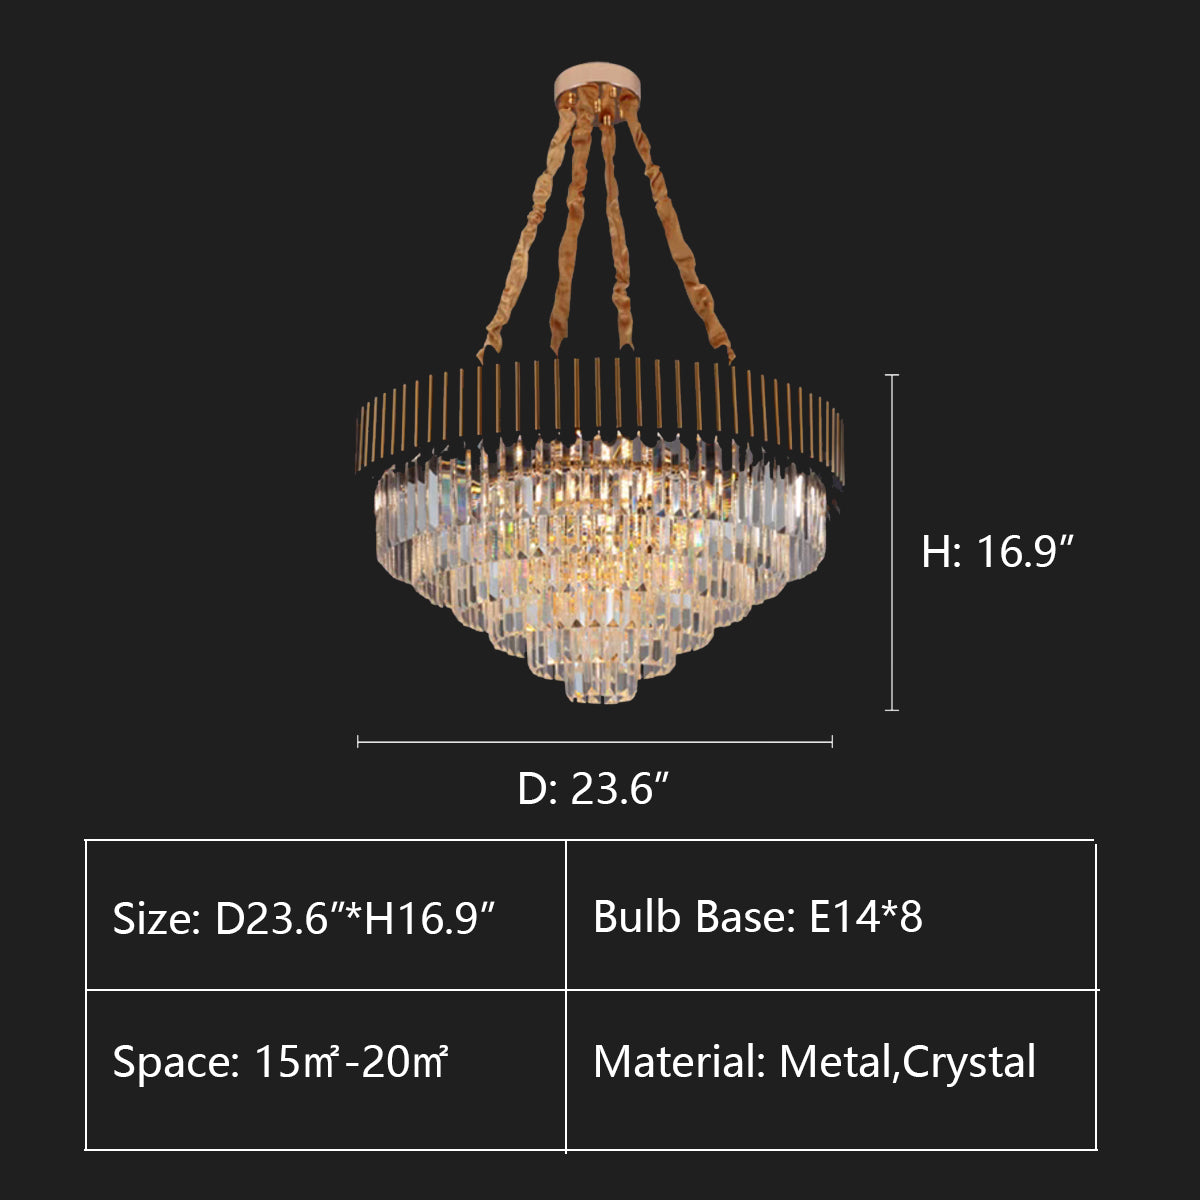 Round: D23.6"*H16.9" chandelier,chandeliers,crystal,metal,clear crystal,gold metal,branch,multi-tier,tiers,ceiling,living room,dining room,overswized,round,rectangle,oval